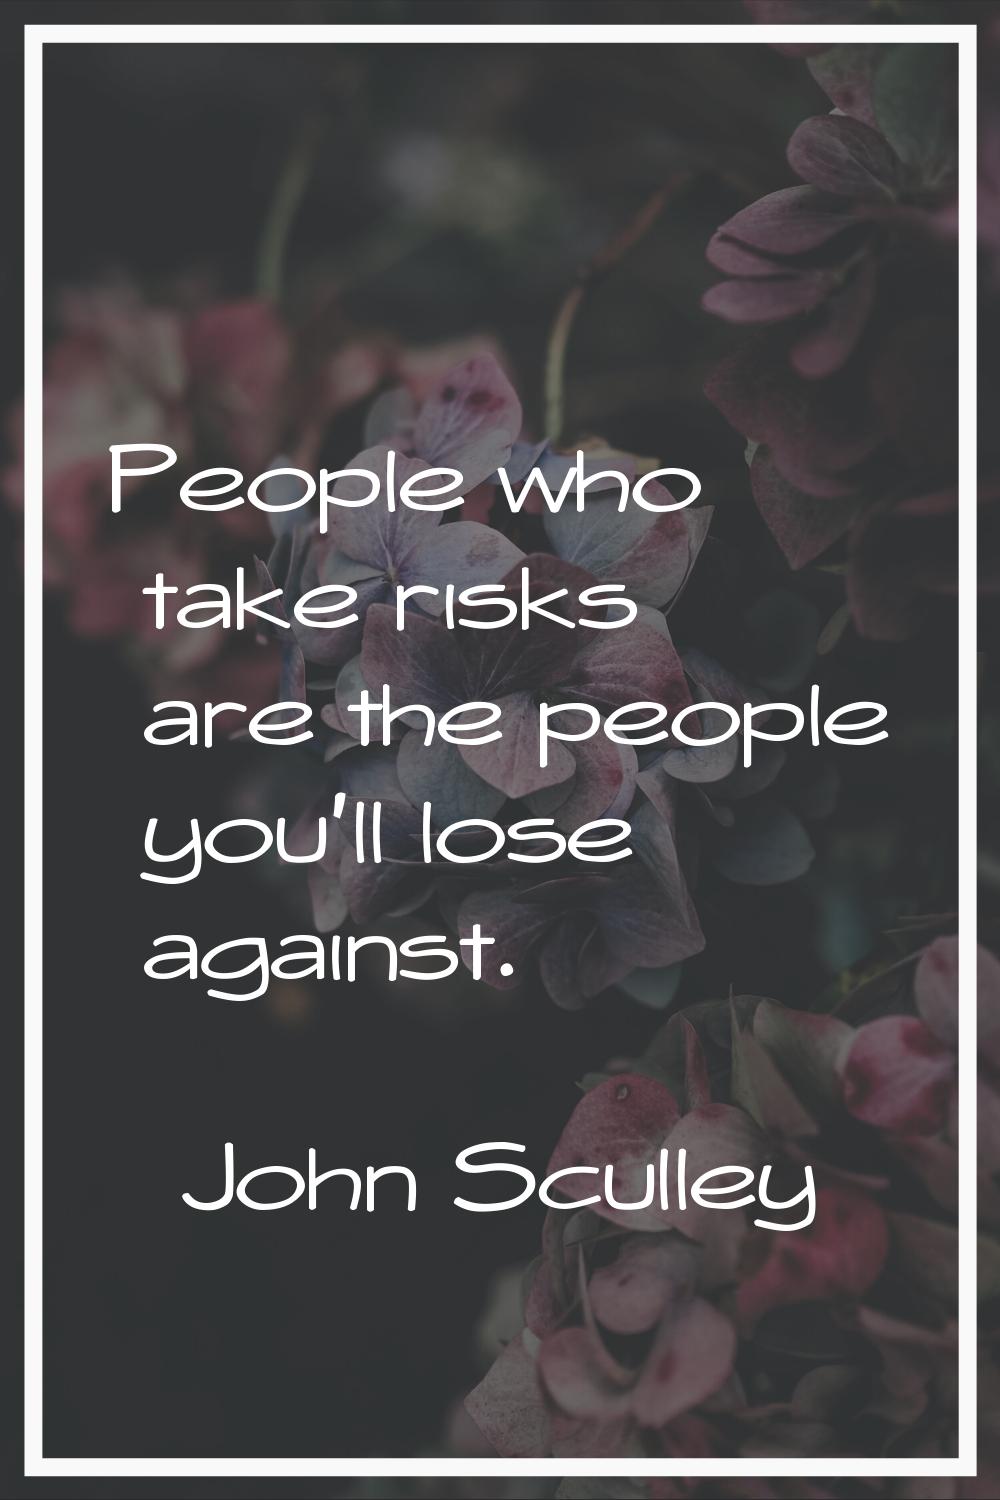 People who take risks are the people you'll lose against.